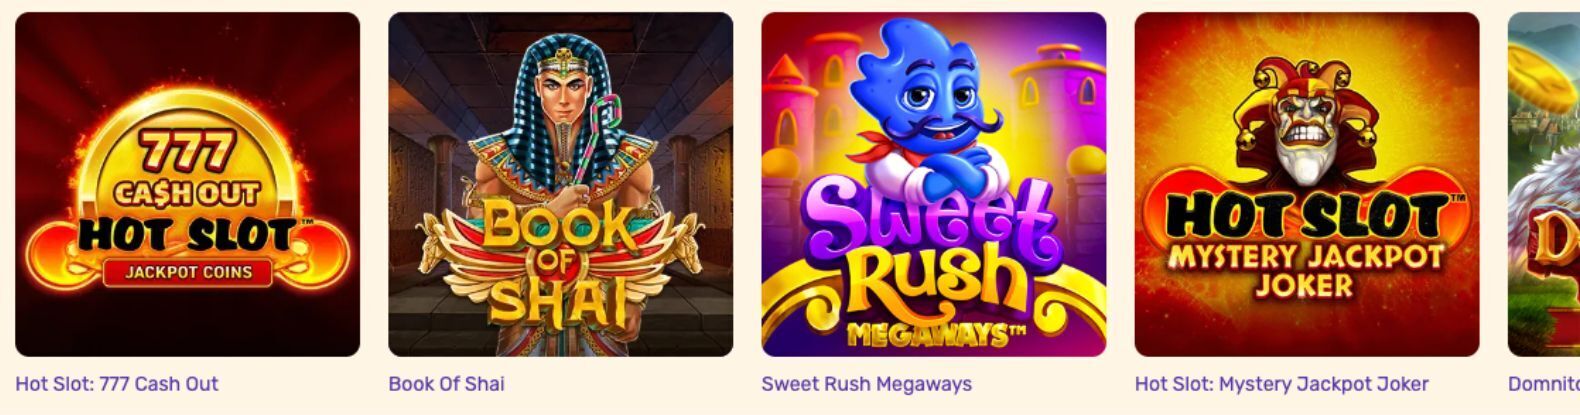 Games Let's Lucky Casino